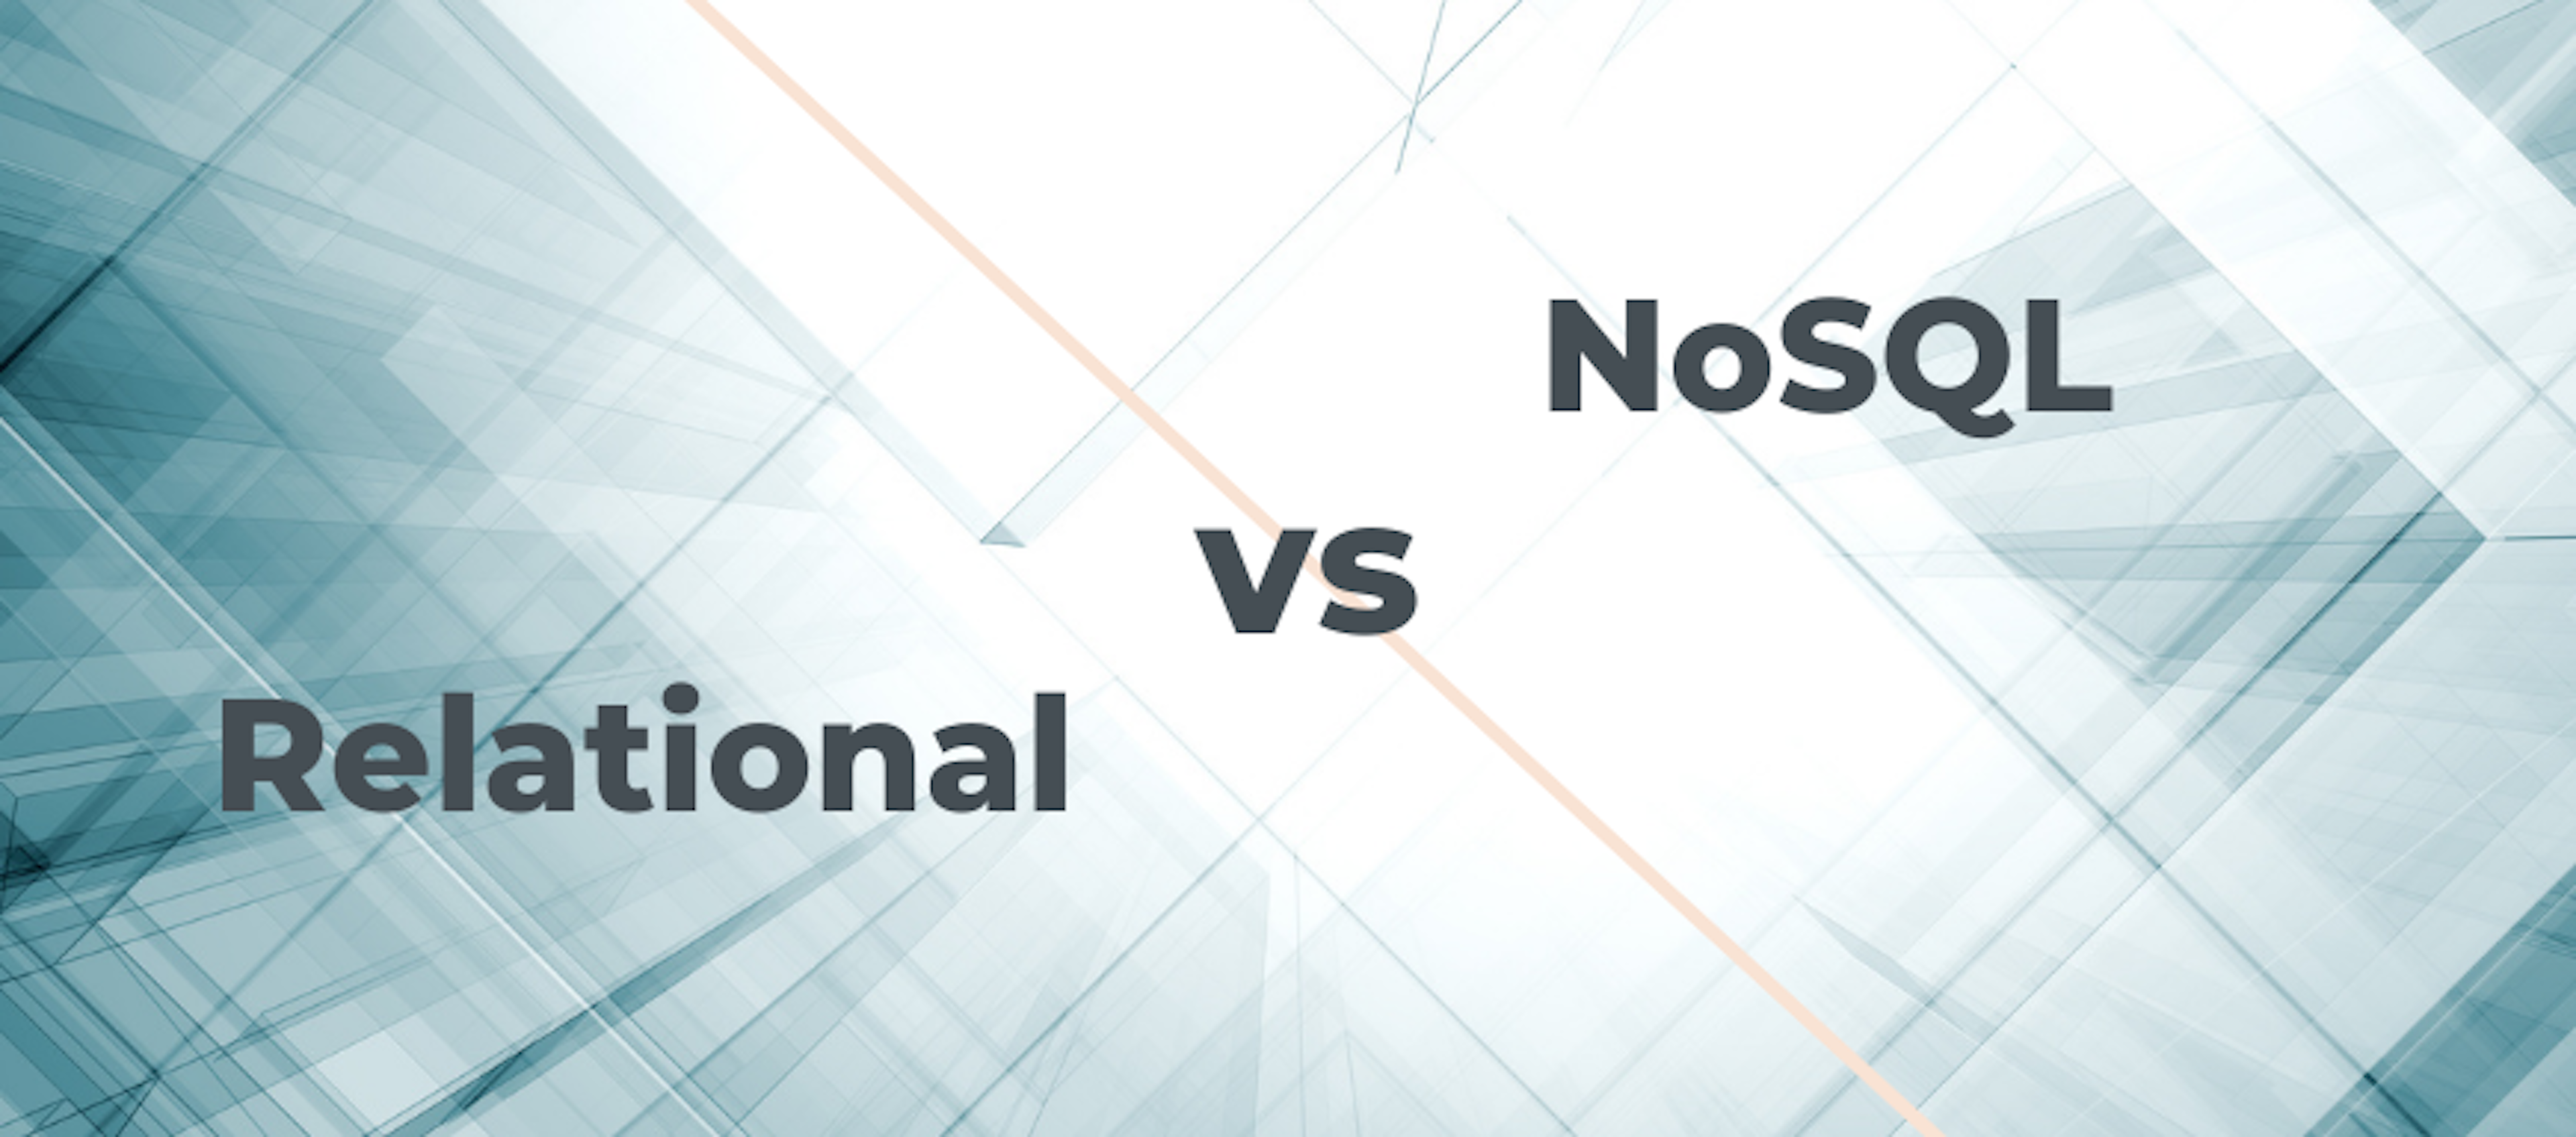 Relational (SQL) and NoSQL Databases